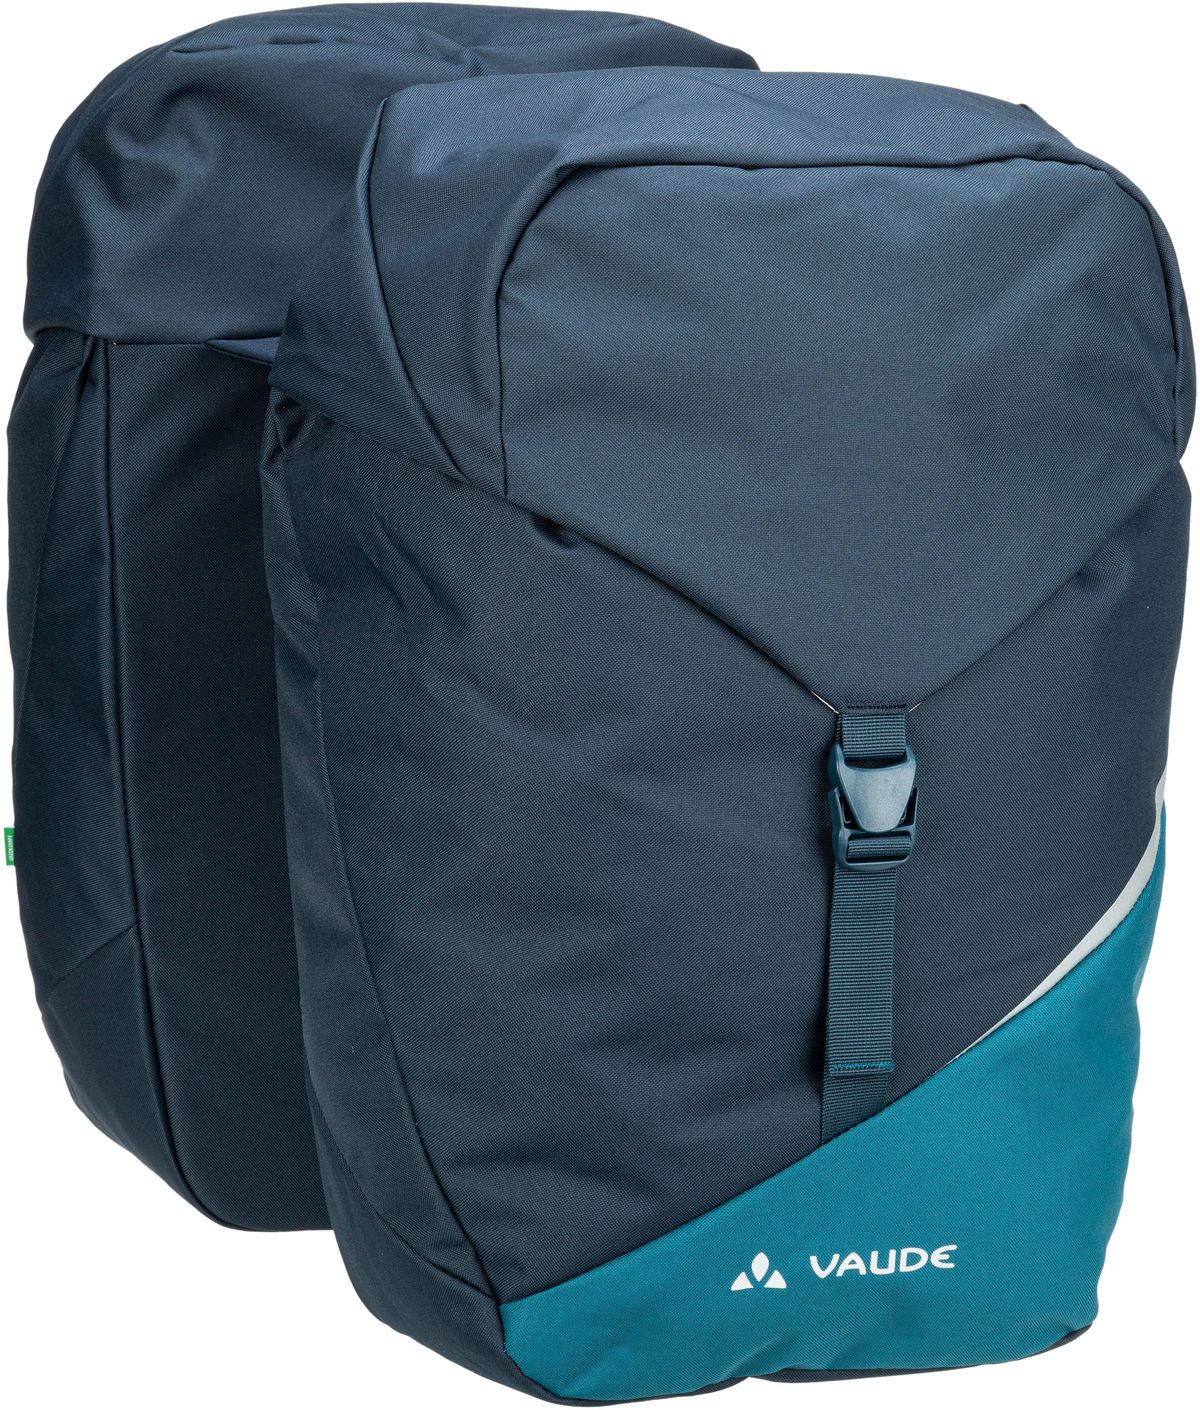 Vaude TwinRoadster - Eclipse